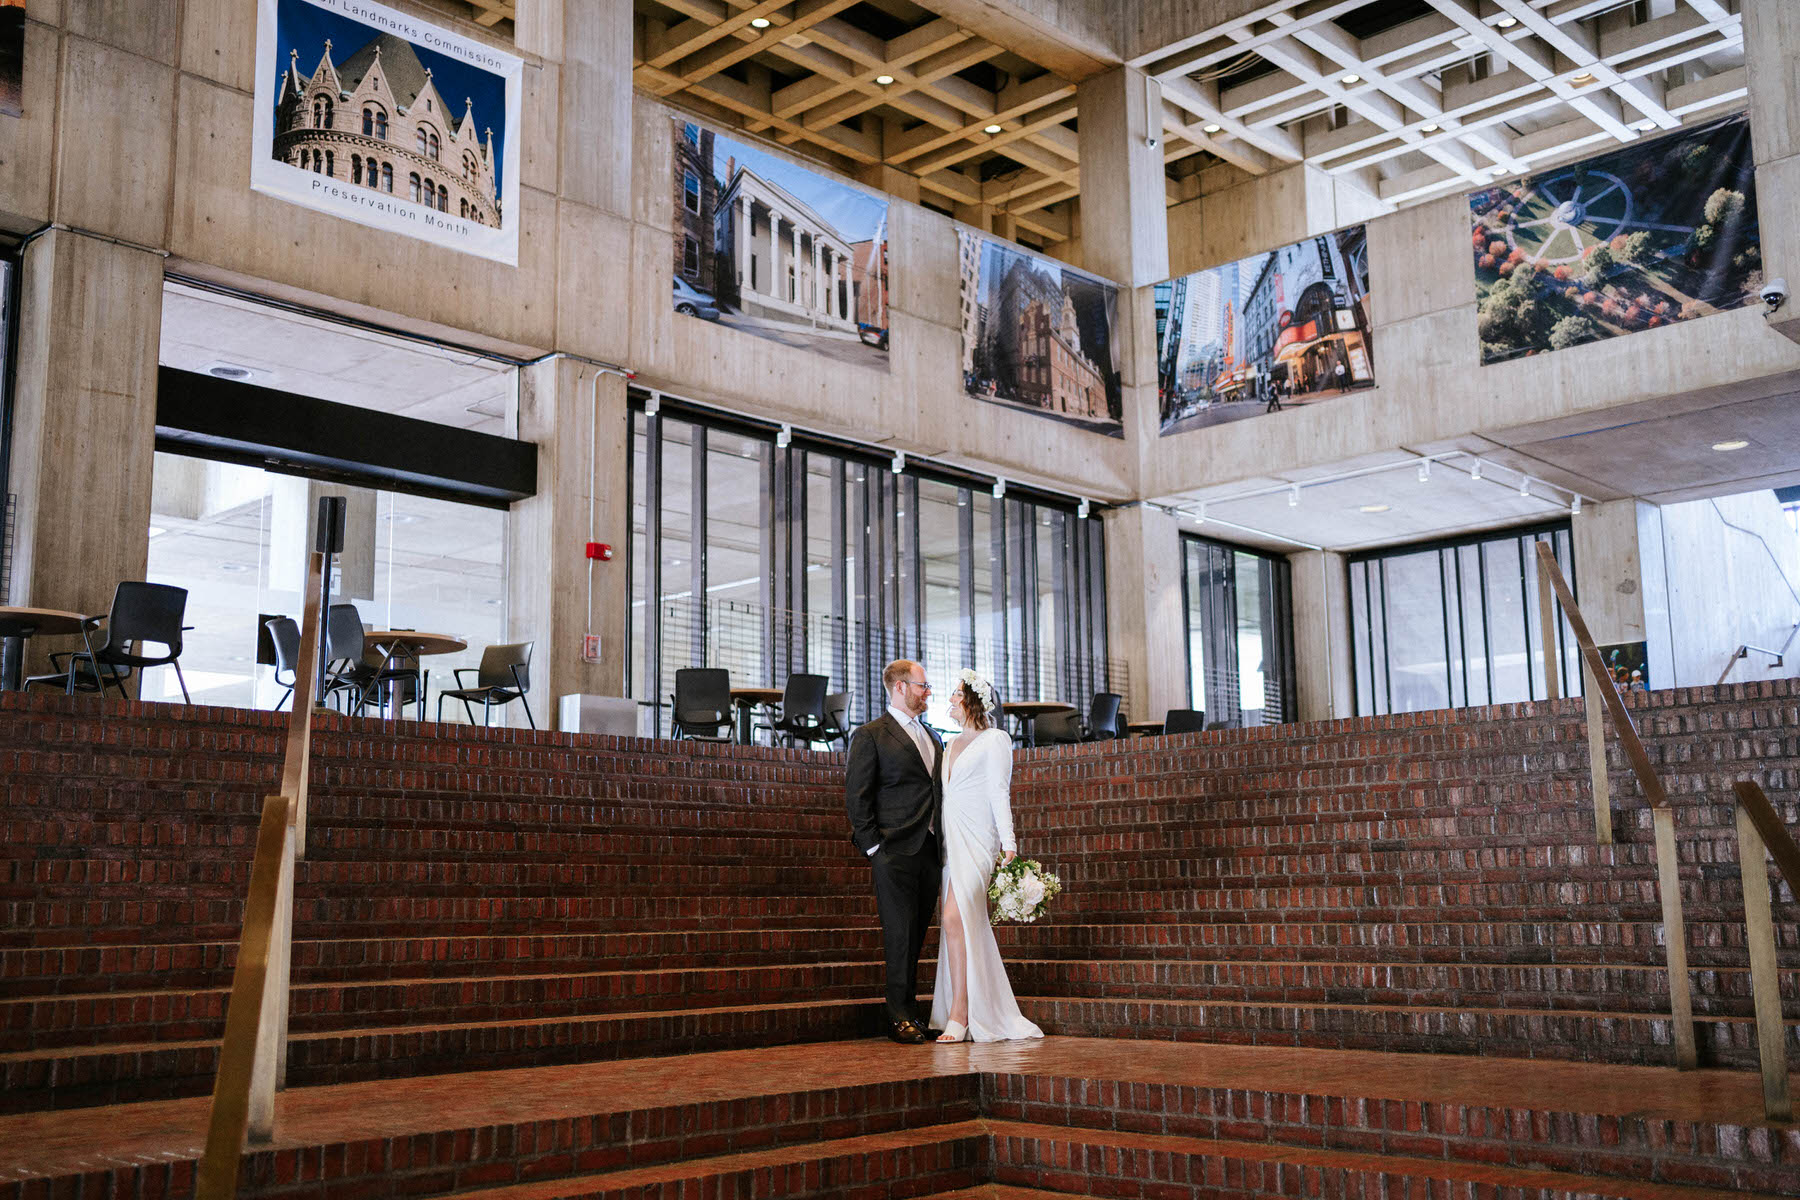 a bride and groom standing on the steps of a building.